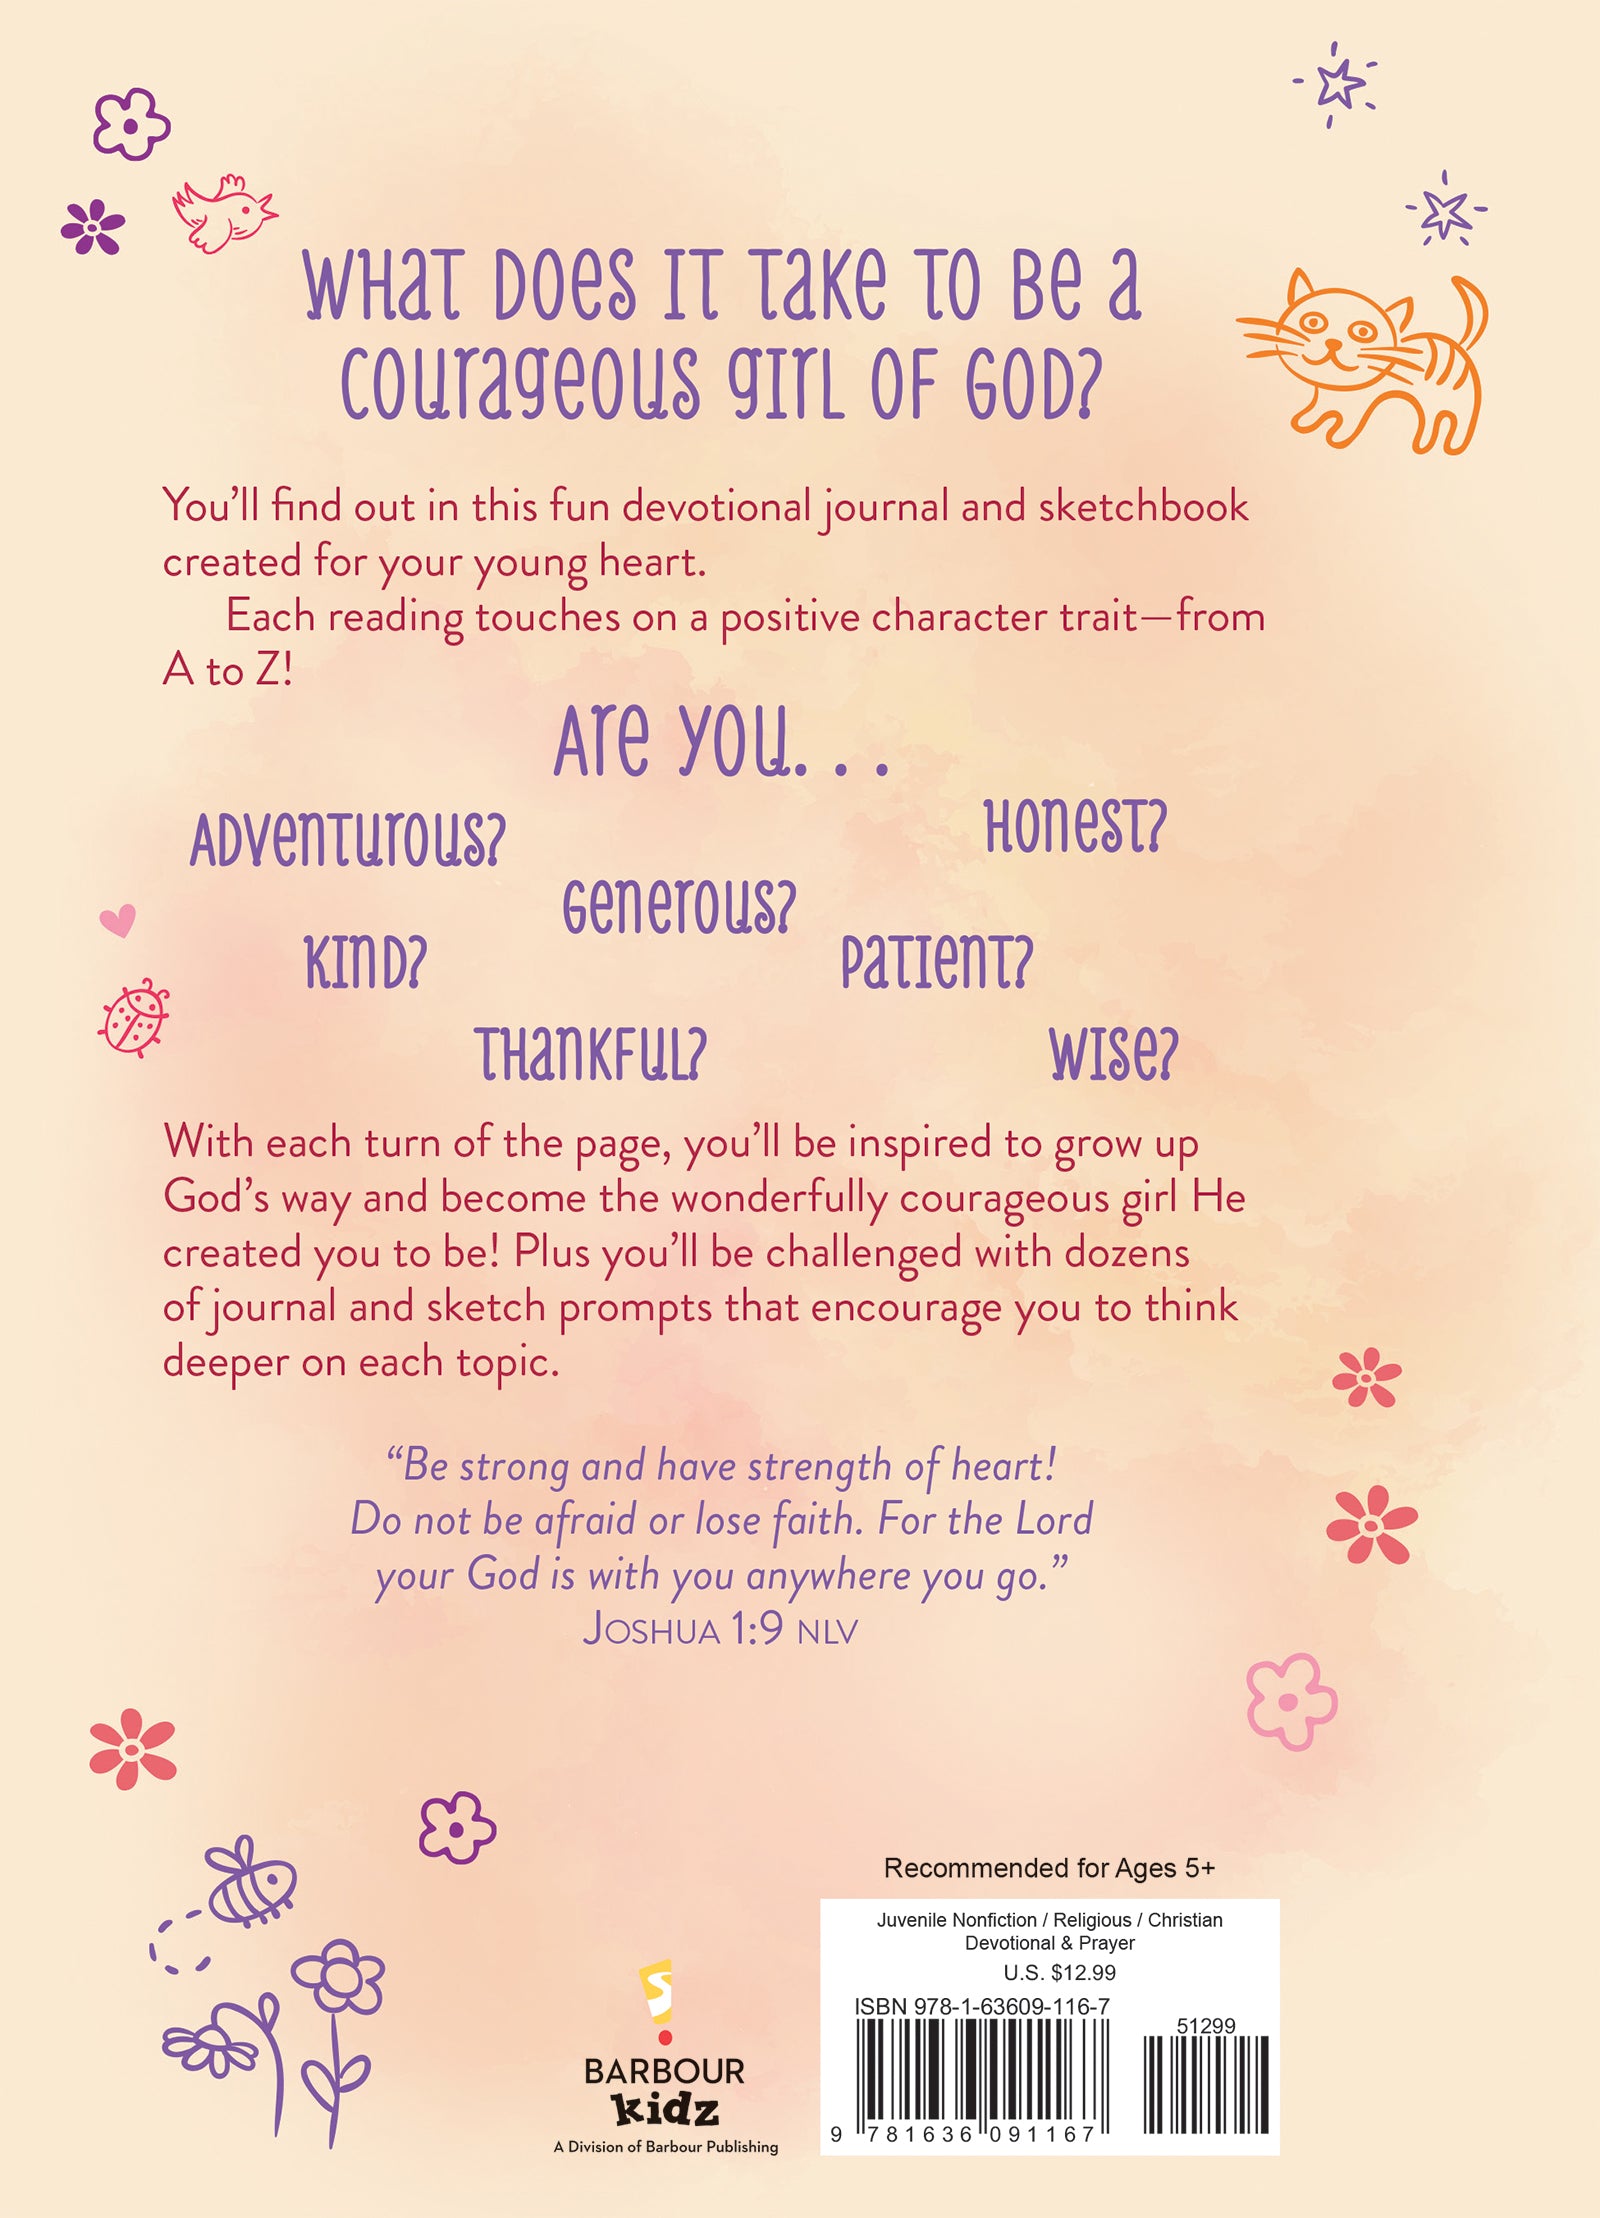 A to Z Devotional Journal and Sketchbook for Courageous Girls - The Christian Gift Company